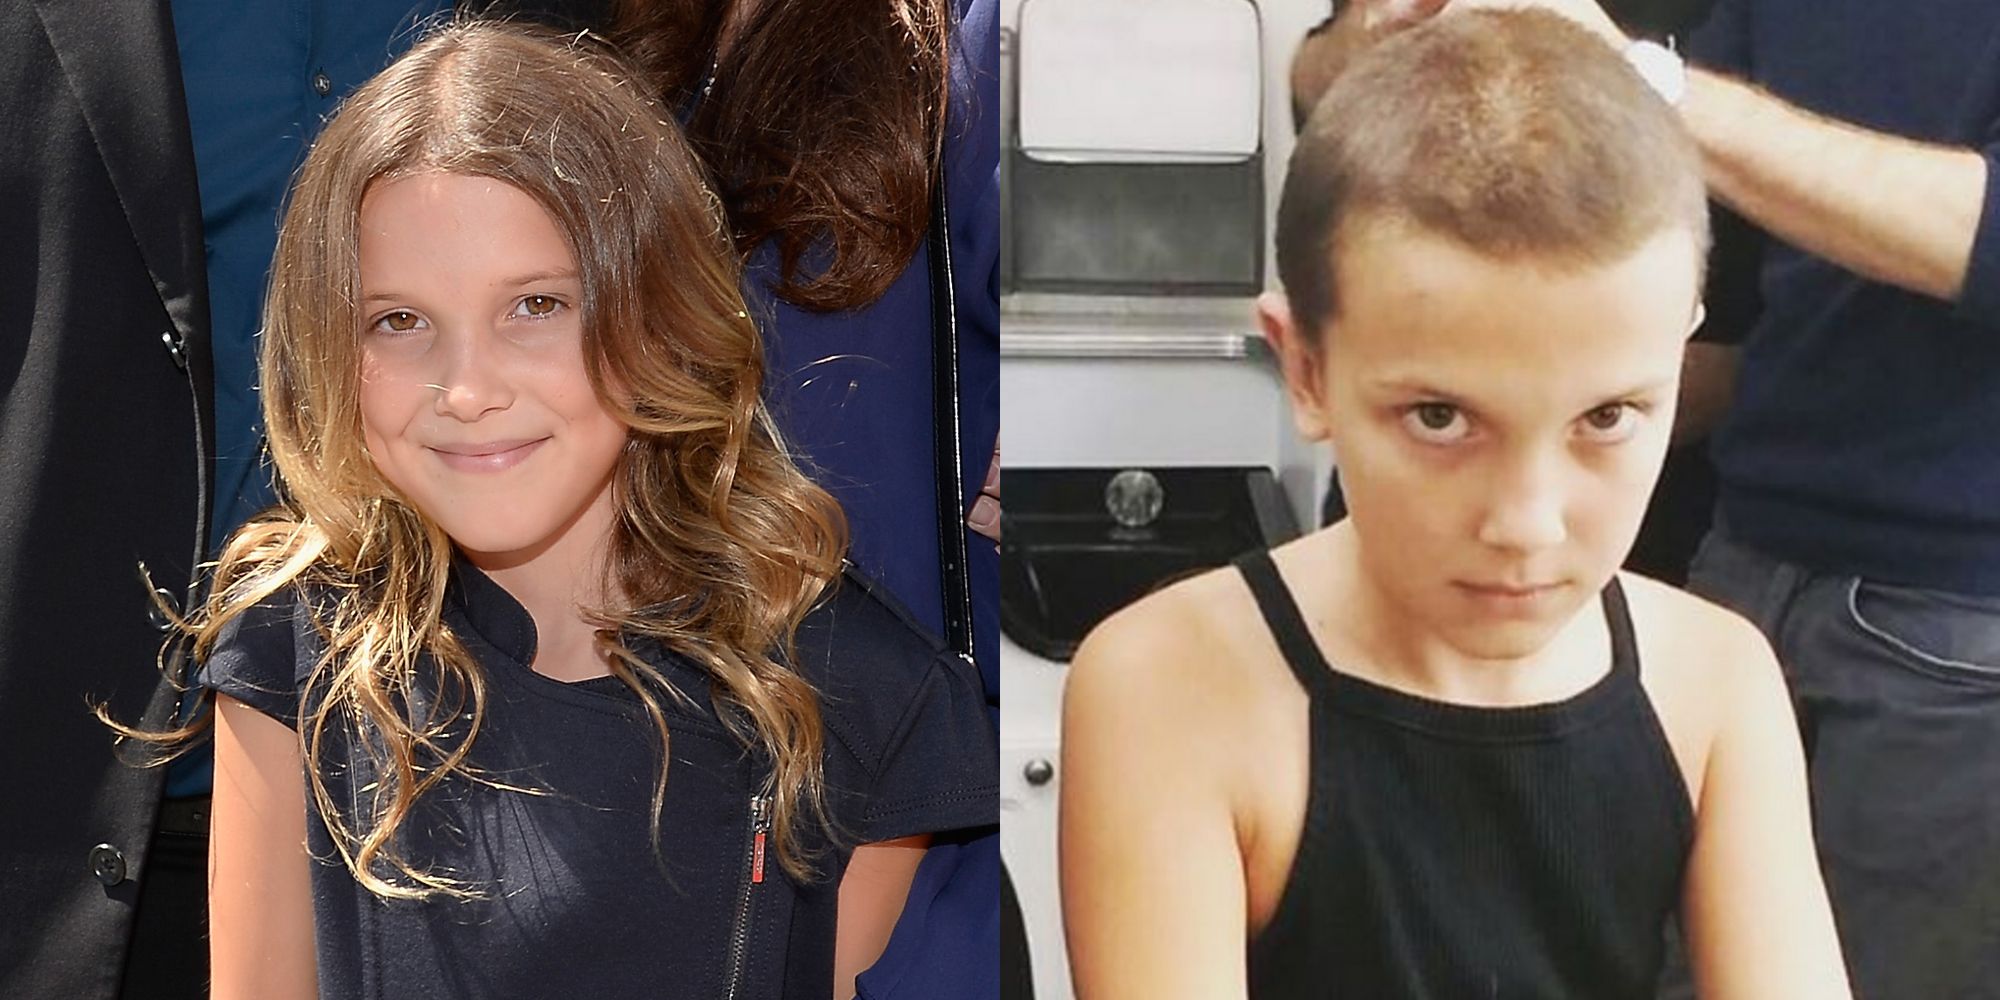 Millie Bobby Brown Shaves Head for Stranger Things - Millie Bobby Brown-Eleven  Hair Transformation Video